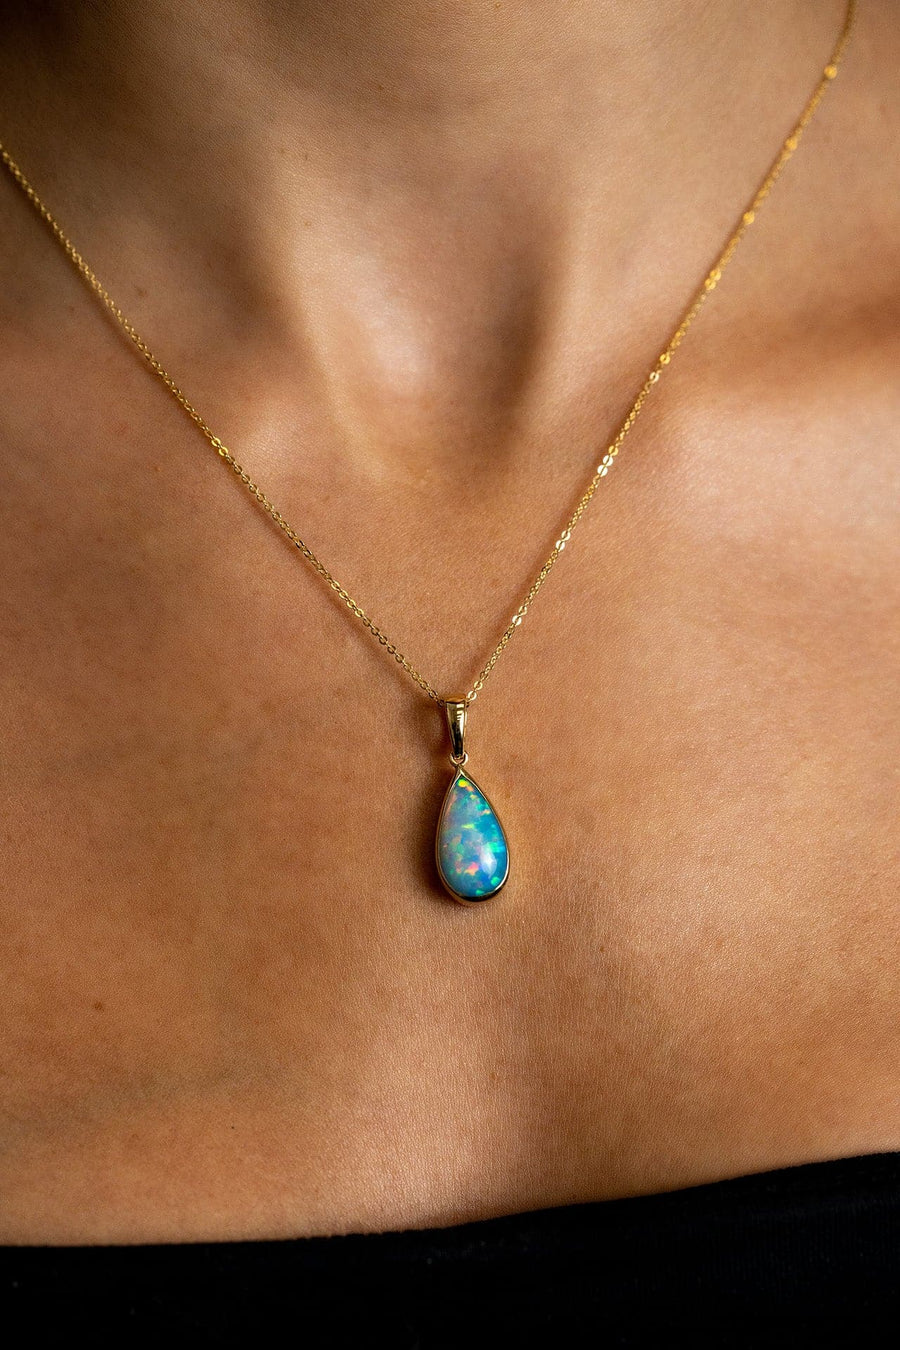 Kostbar Yellow Gold Pear Shaped Opal Pendant - Skeie's Jewelers